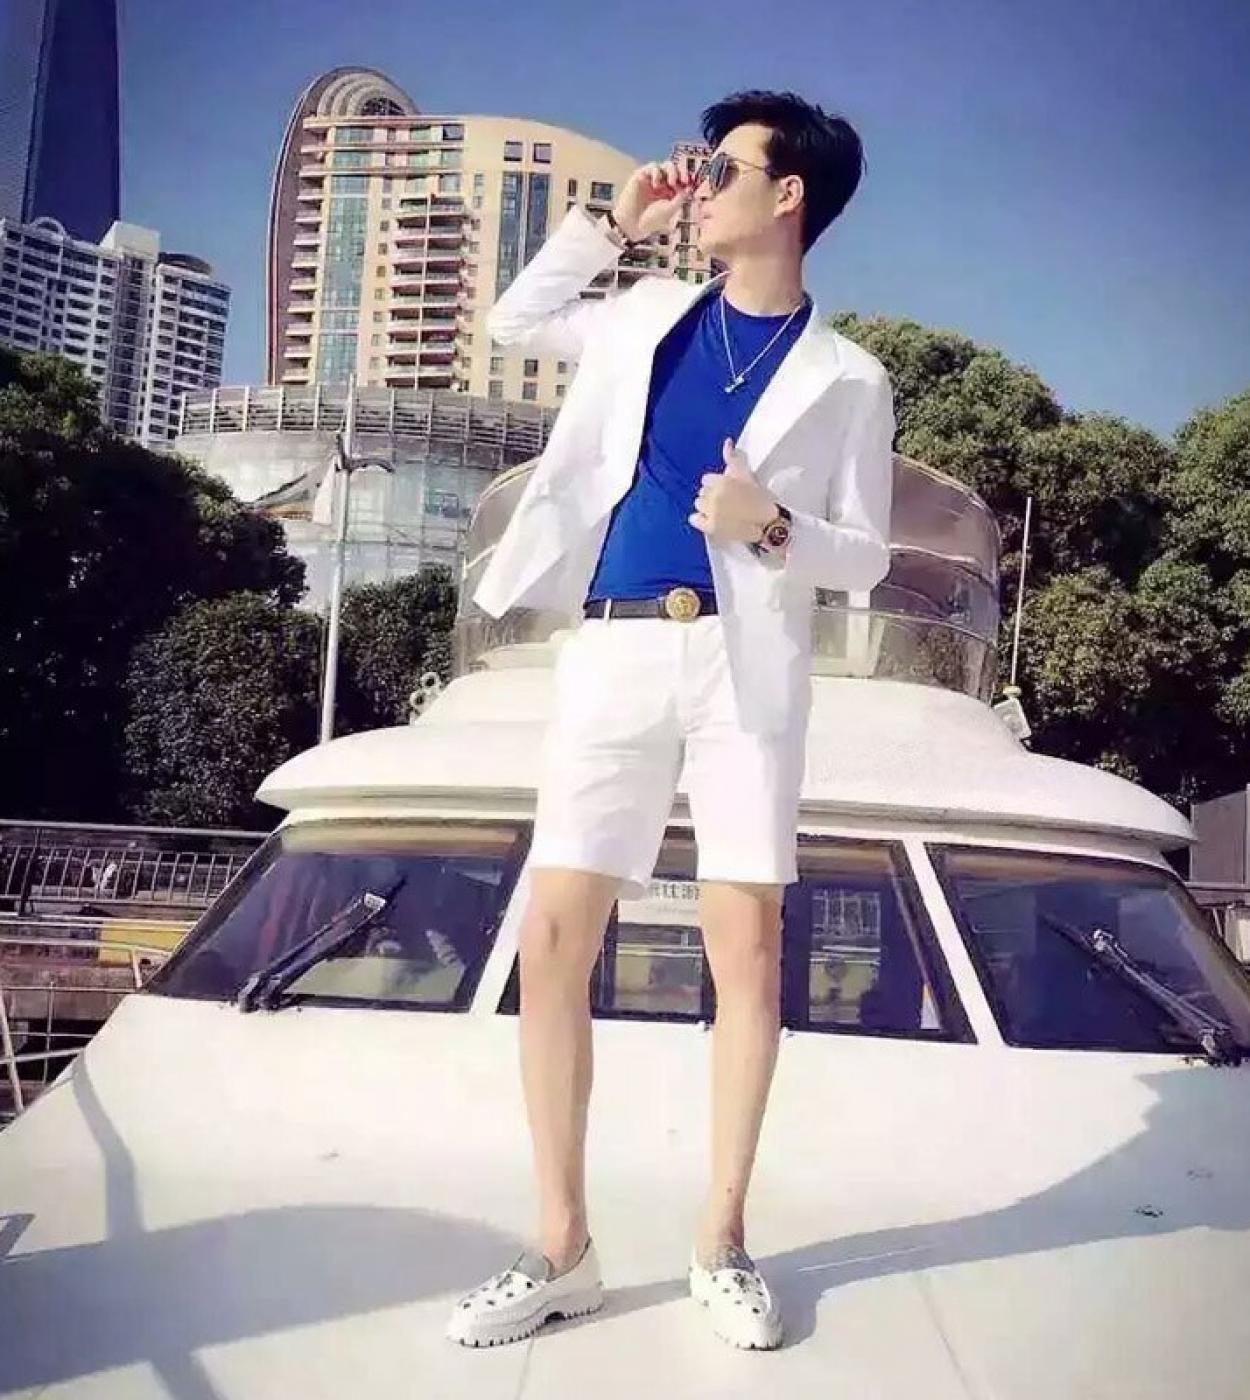 Formal Casual Mens White Jacket Shorts Pants Outfit Casual Slim Fit Summer Cool 2 Pieces Suits Set For Beach Party And 